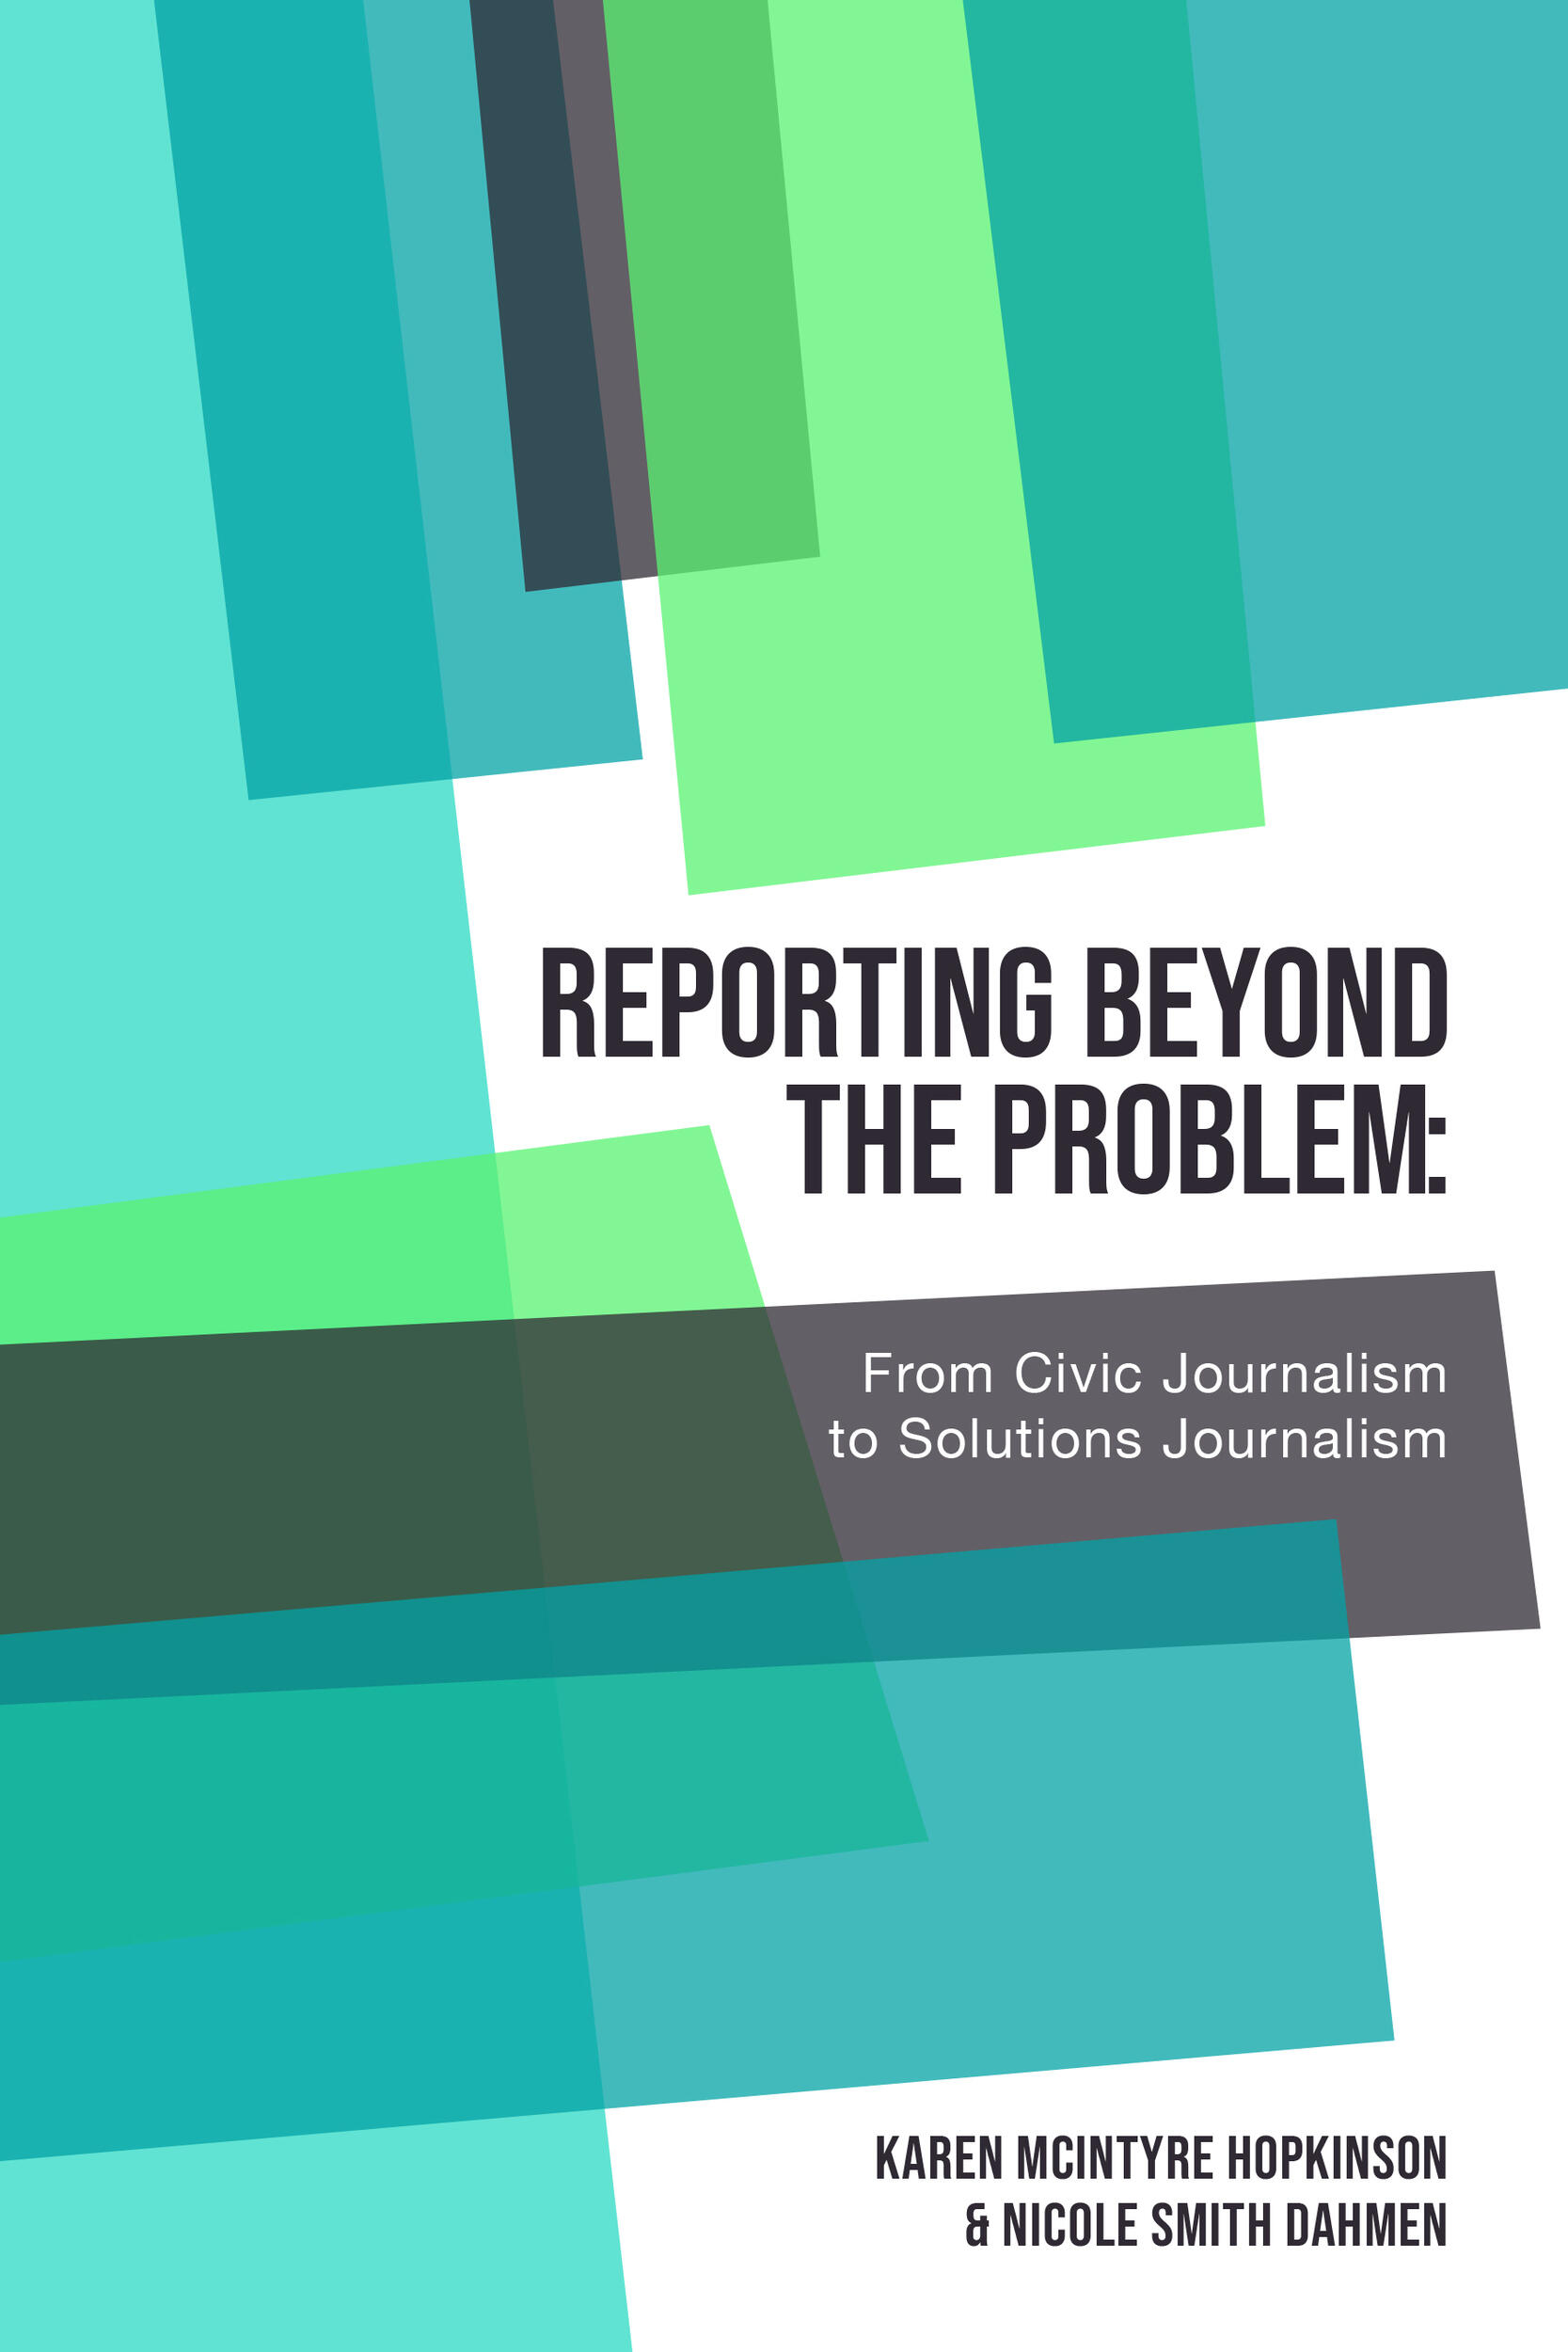 The cover of "Reporting Beyond the Problem: From Civic Journalism to Solutions Journalism."